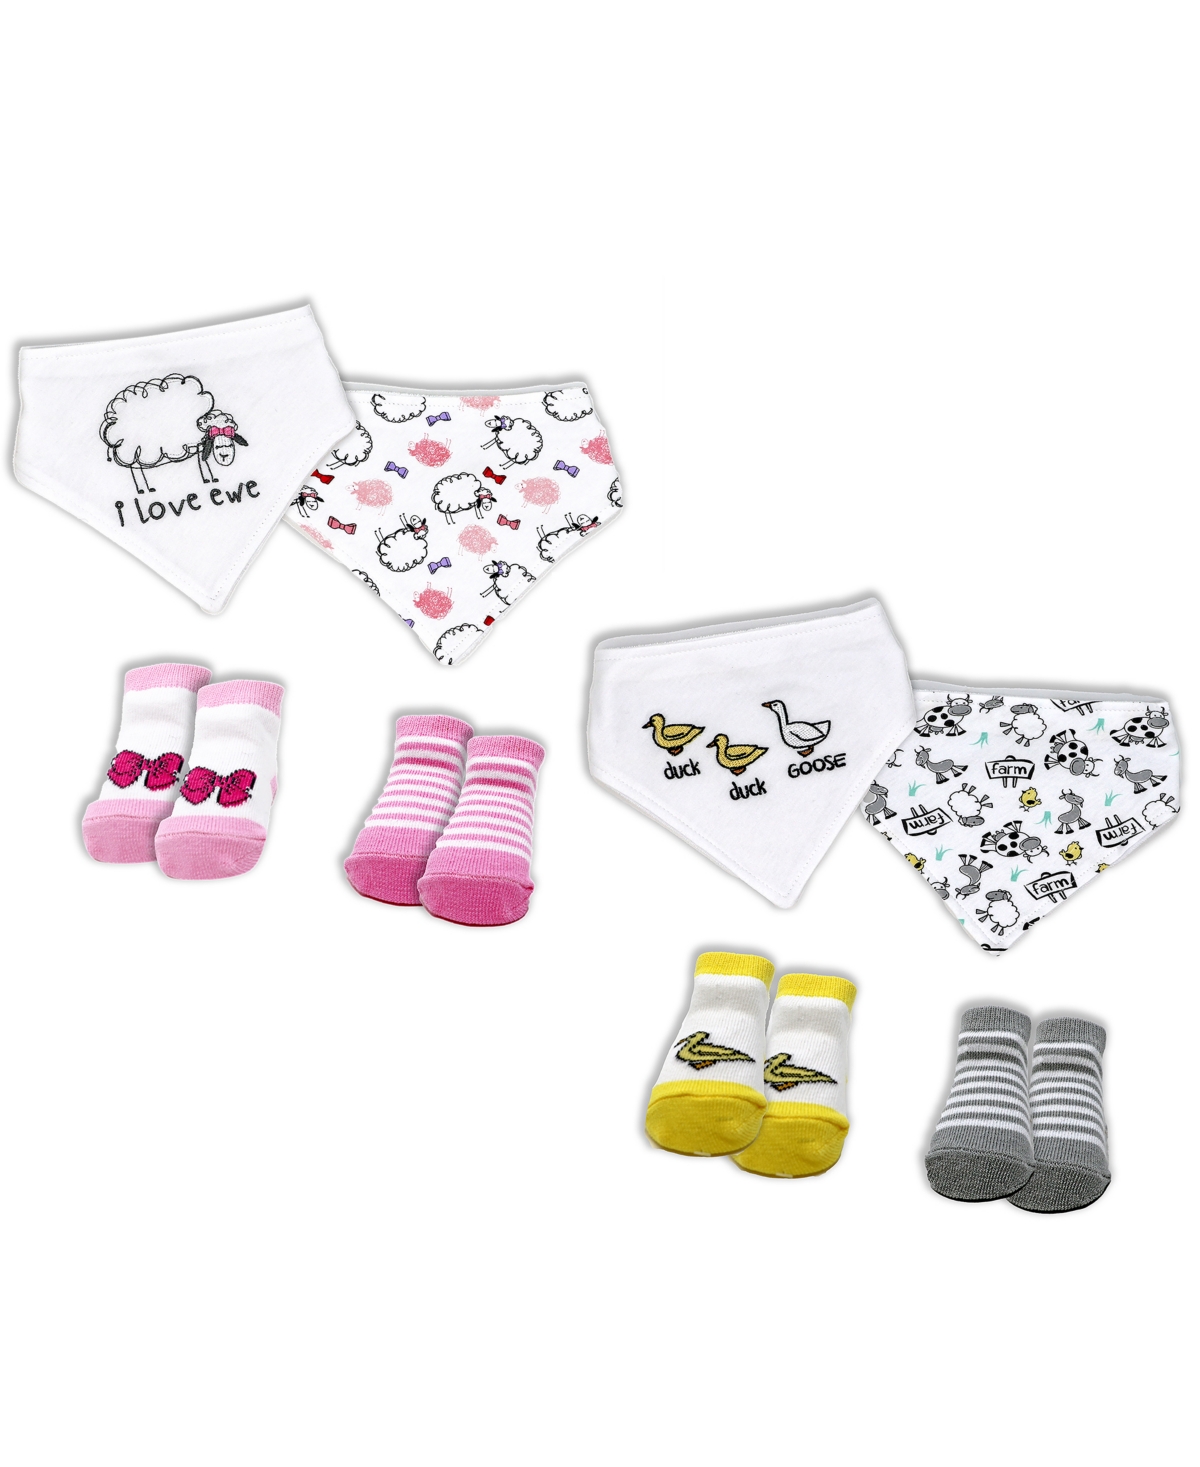 Baby Mode Baby Girls Closure Bibs And Socks, 8 Piece Set In Pink Sheeps